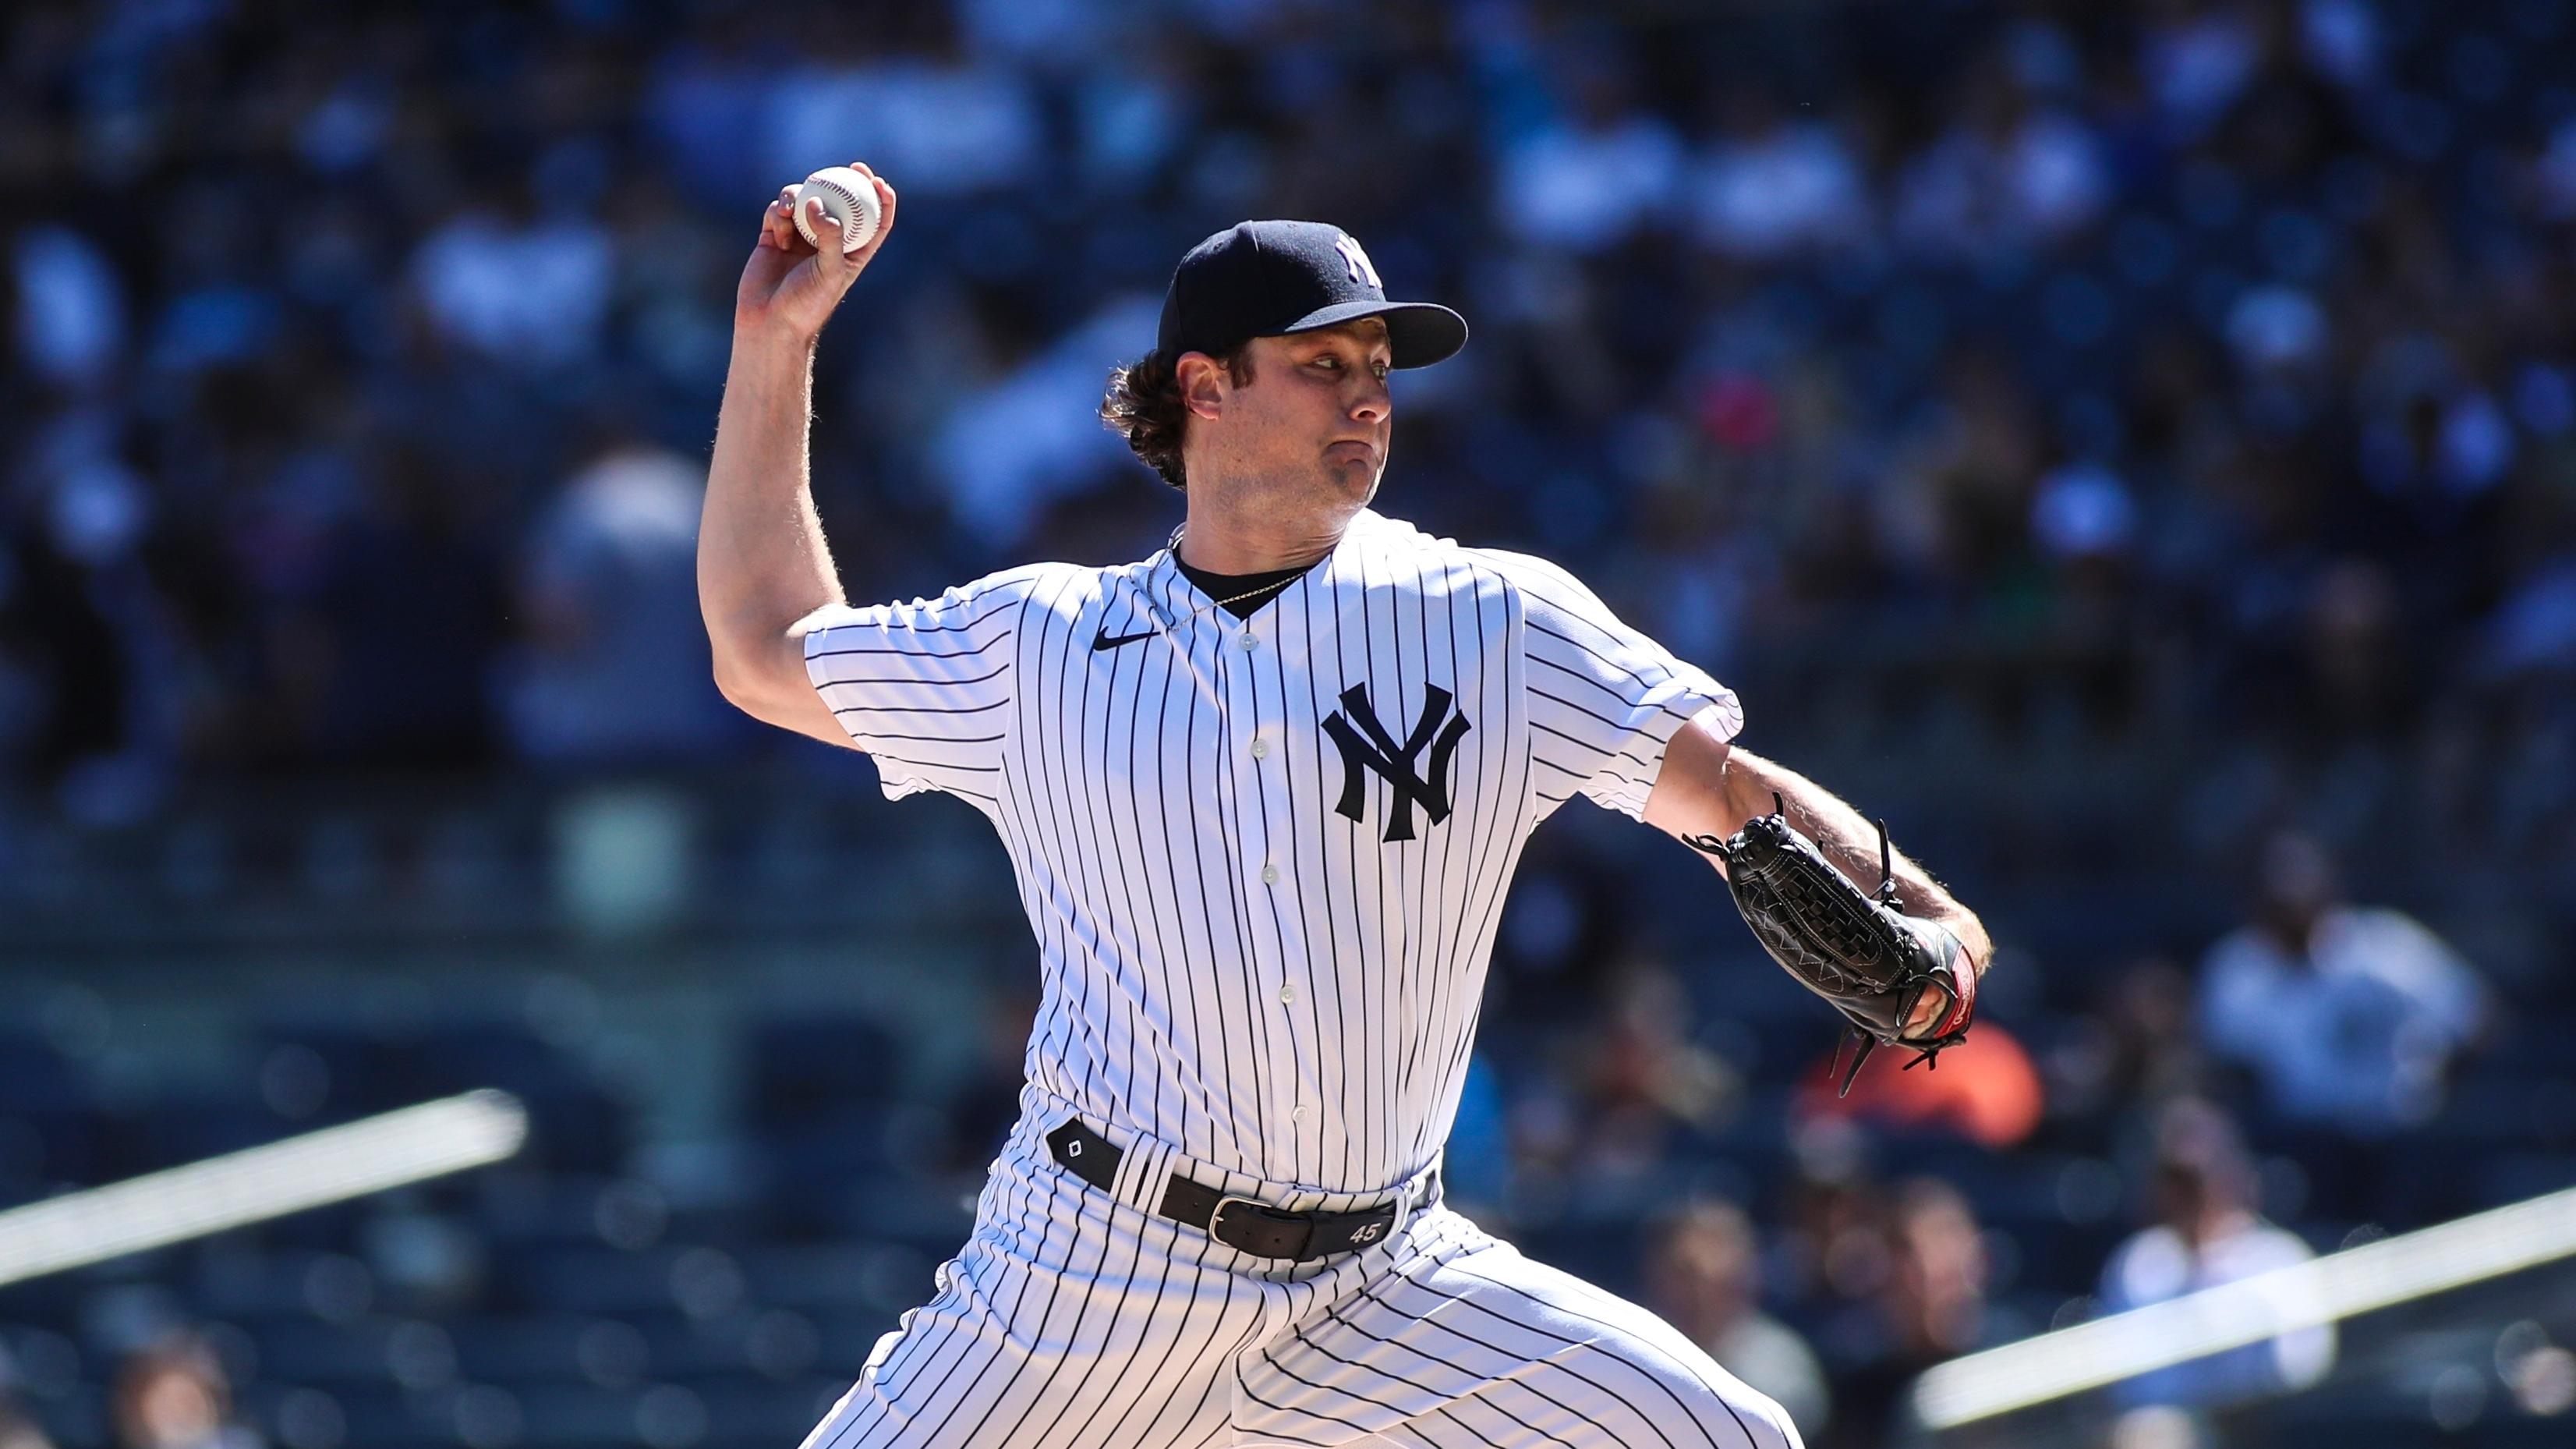 New York Yankees pitcher Gerrit Cole (45) pitches in the first inning against the Cleveland Indians at Yankee Stadium. / Wendell Cruz-USA TODAY Sports